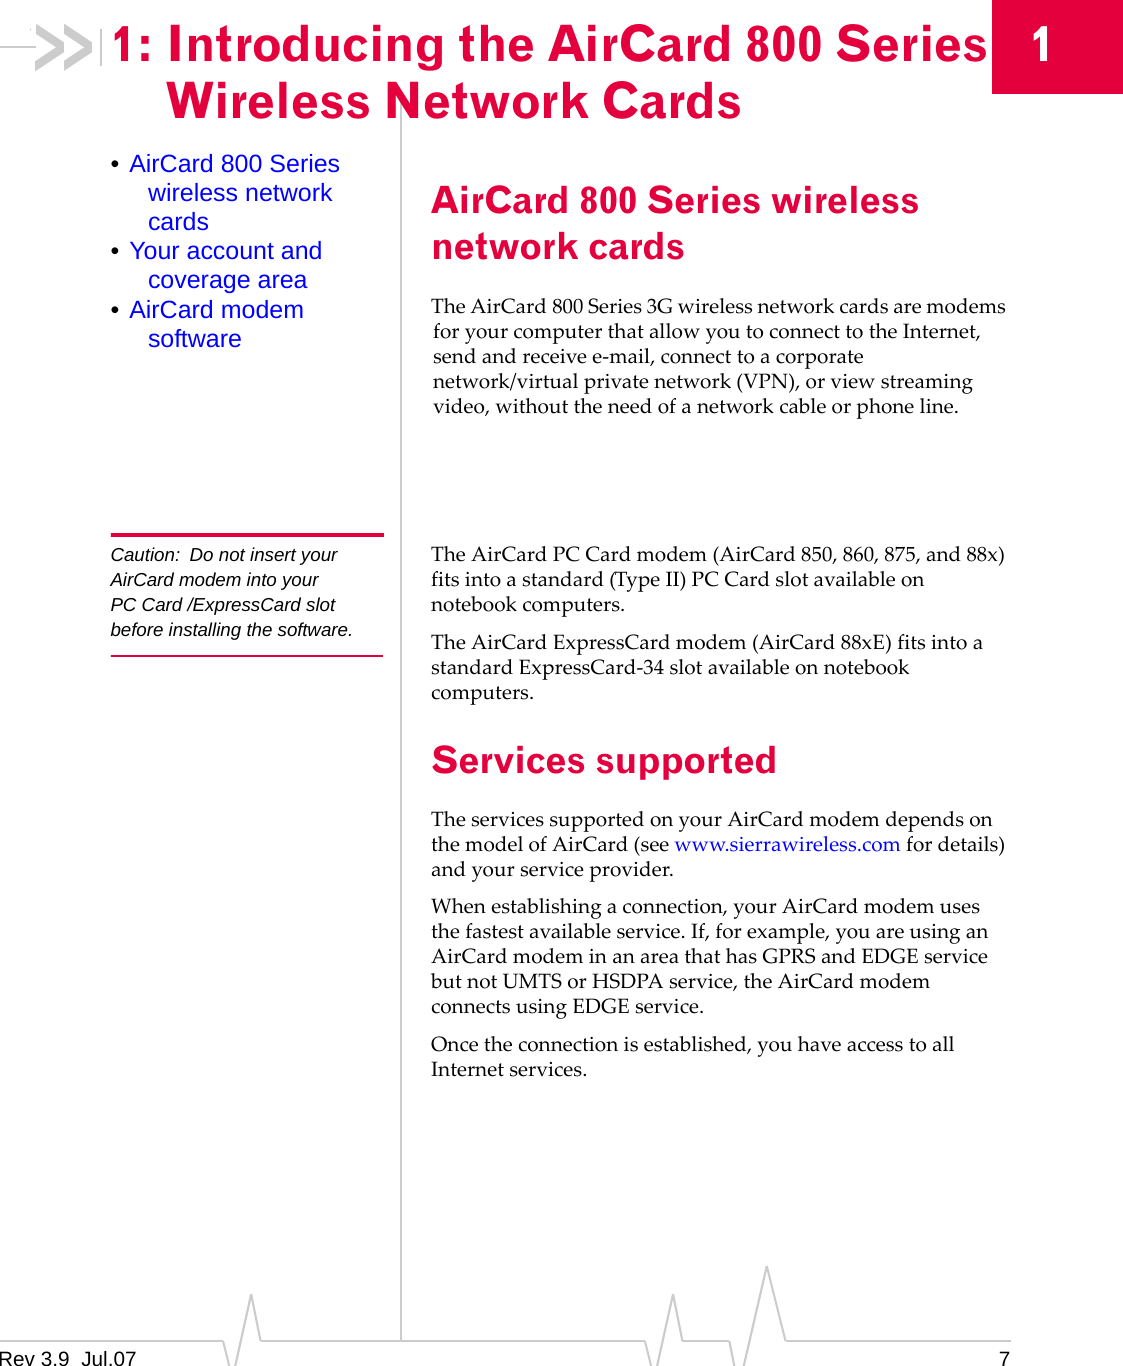 1: Introducing the AirCard 800 Series Wireless Network Cards 1 • AirCard 800 Series wireless network cards • Your account and coverage area • AirCard modem software Caution:  Do not insert your AirCard modem into your PC Card /ExpressCard slot before installing the software. AirCard 800 Series wireless network cards The AirCard 800 Series 3G wireless network cards are modems for your computer that allow you to connect to the Internet, send and receive e-mail, connect to a corporate network/virtual private network (VPN), or view streaming video, without the need of a network cable or phone line. The AirCard PC Card modem (AirCard 850, 860, 875, and 88x) fits into a standard (Type II) PC Card slot available on notebook computers. The AirCard ExpressCard modem (AirCard 88xE) fits into a standard ExpressCard-34 slot available on notebook computers. Services supported The services supported on your AirCard modem depends on the model of AirCard (see www.sierrawireless.com for details) and your service provider. When establishing a connection, your AirCard modem uses the fastest available service. If, for example, you are using an AirCard modem in an area that has GPRS and EDGE service but not UMTS or HSDPA service, the AirCard modem connects using EDGE service. Once the connection is established, you have access to all Internet services. Rev 3.9  Jul.07  7 